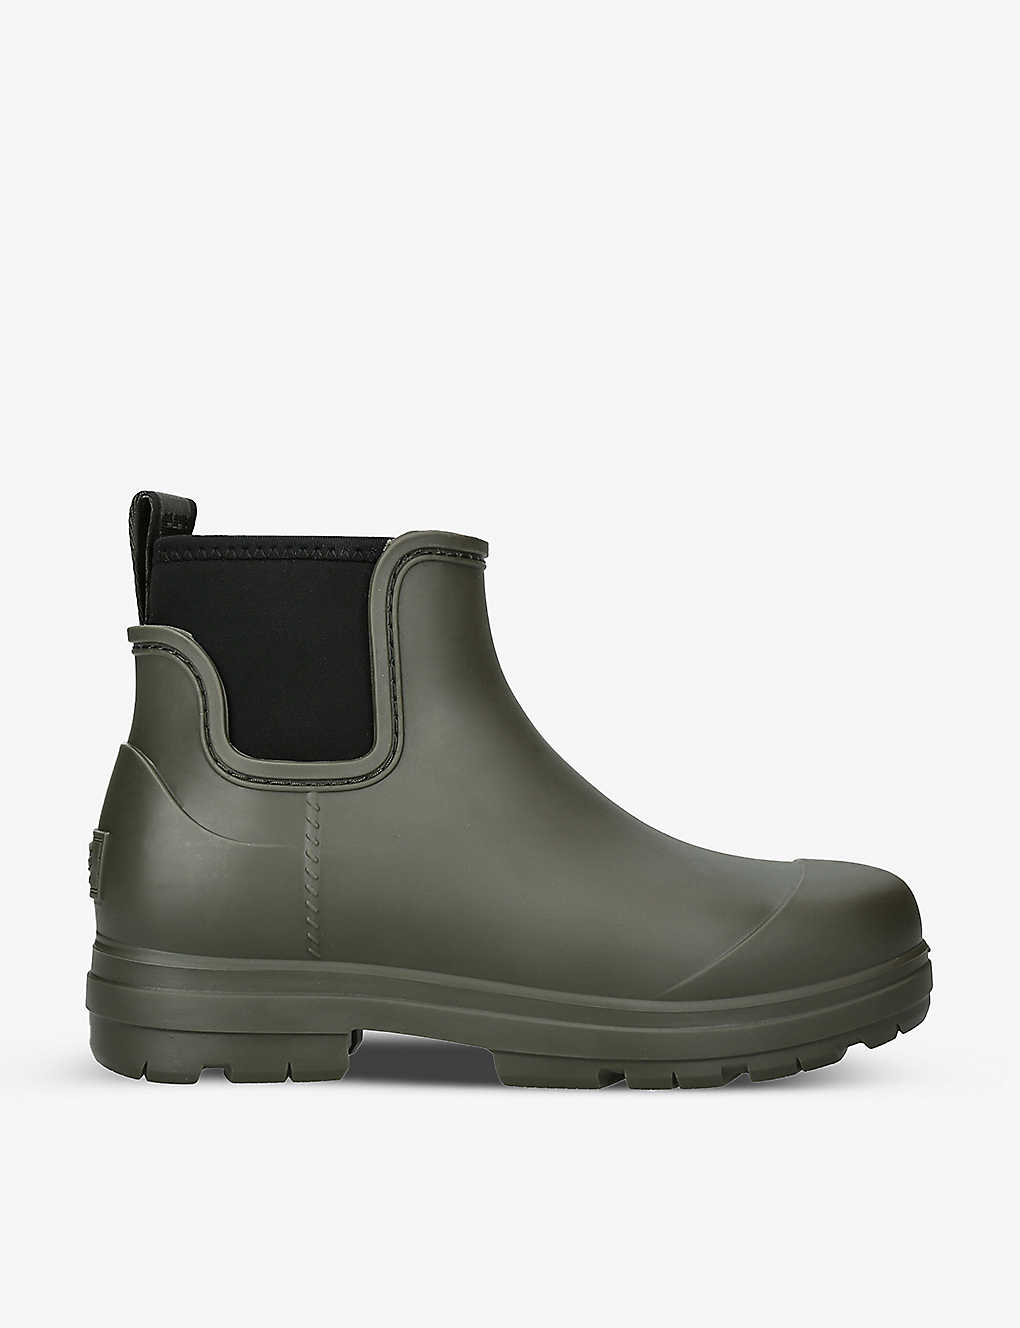 Shop Ugg Women's Green Droplet Rubber Chelsea Boots